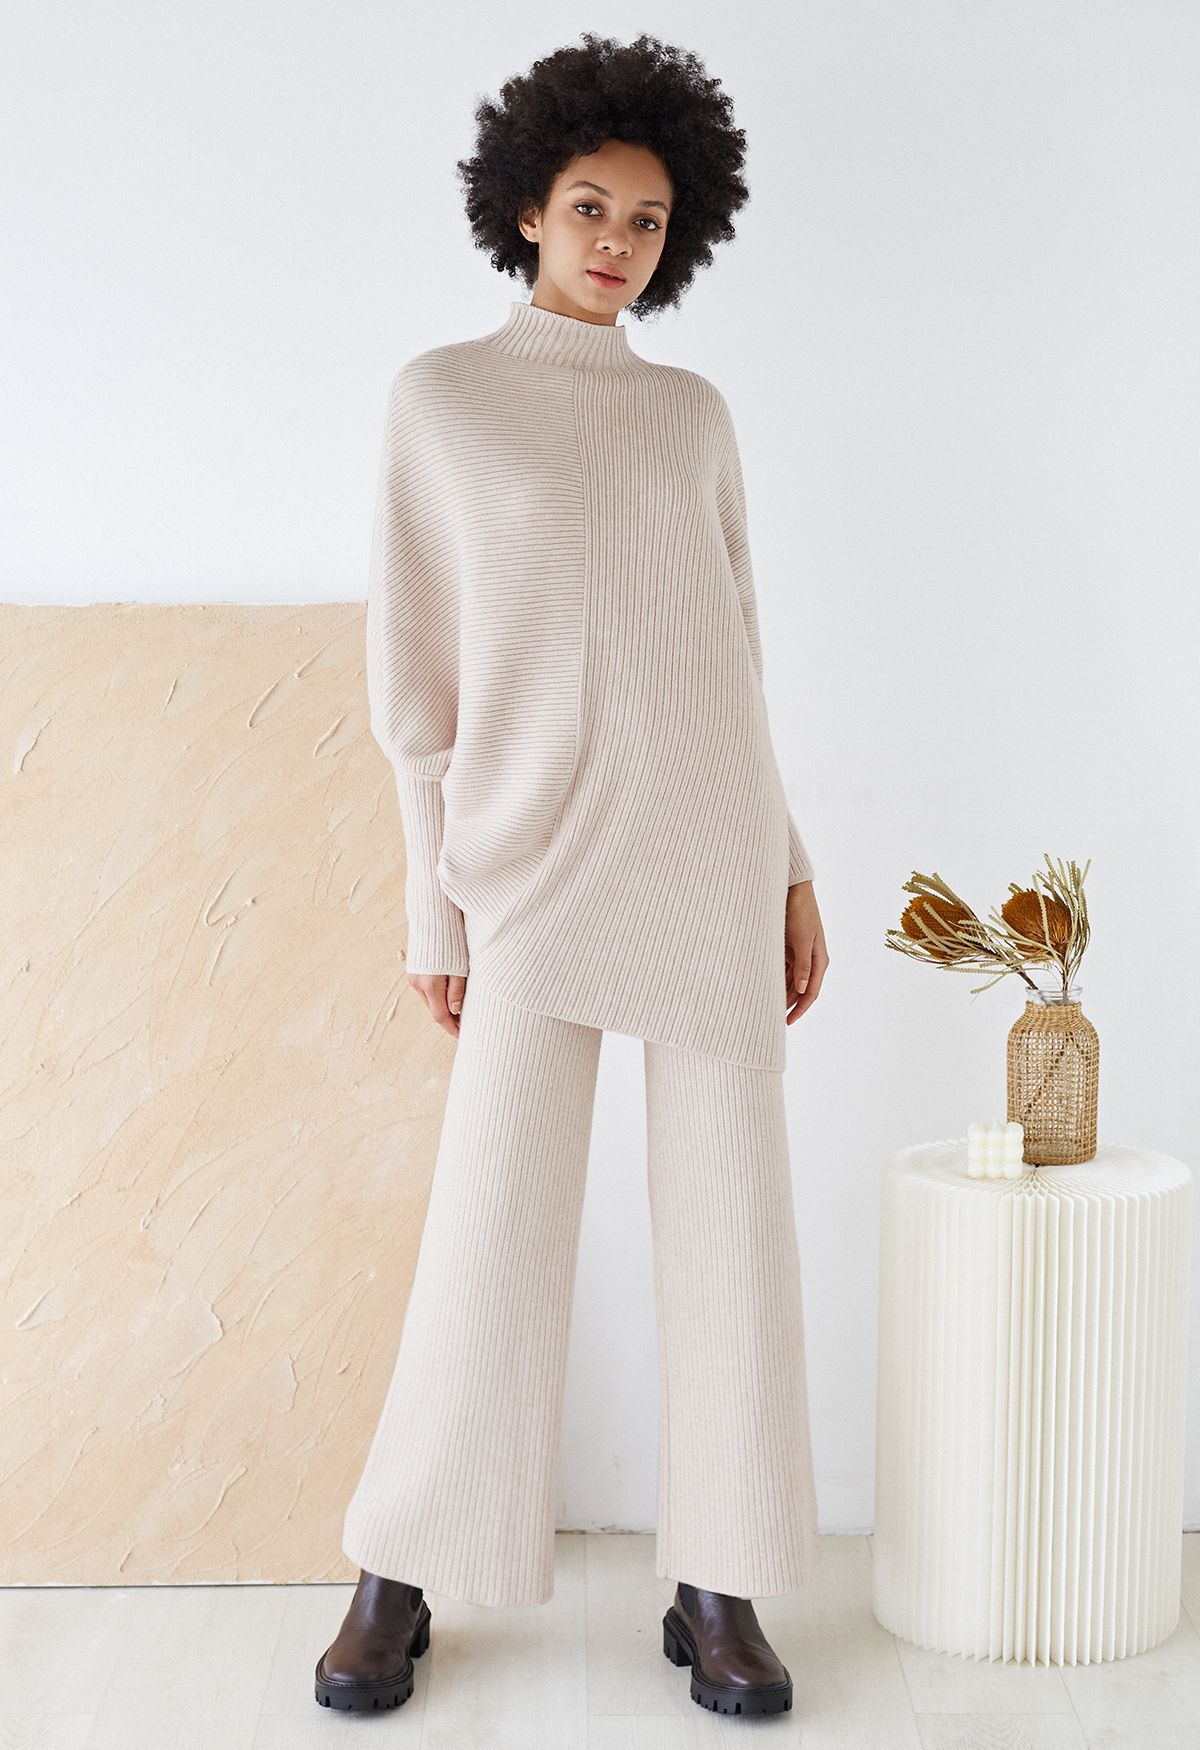 Asymmetric Batwing Sleeve Sweater and Pants Knit Set in Light Tan